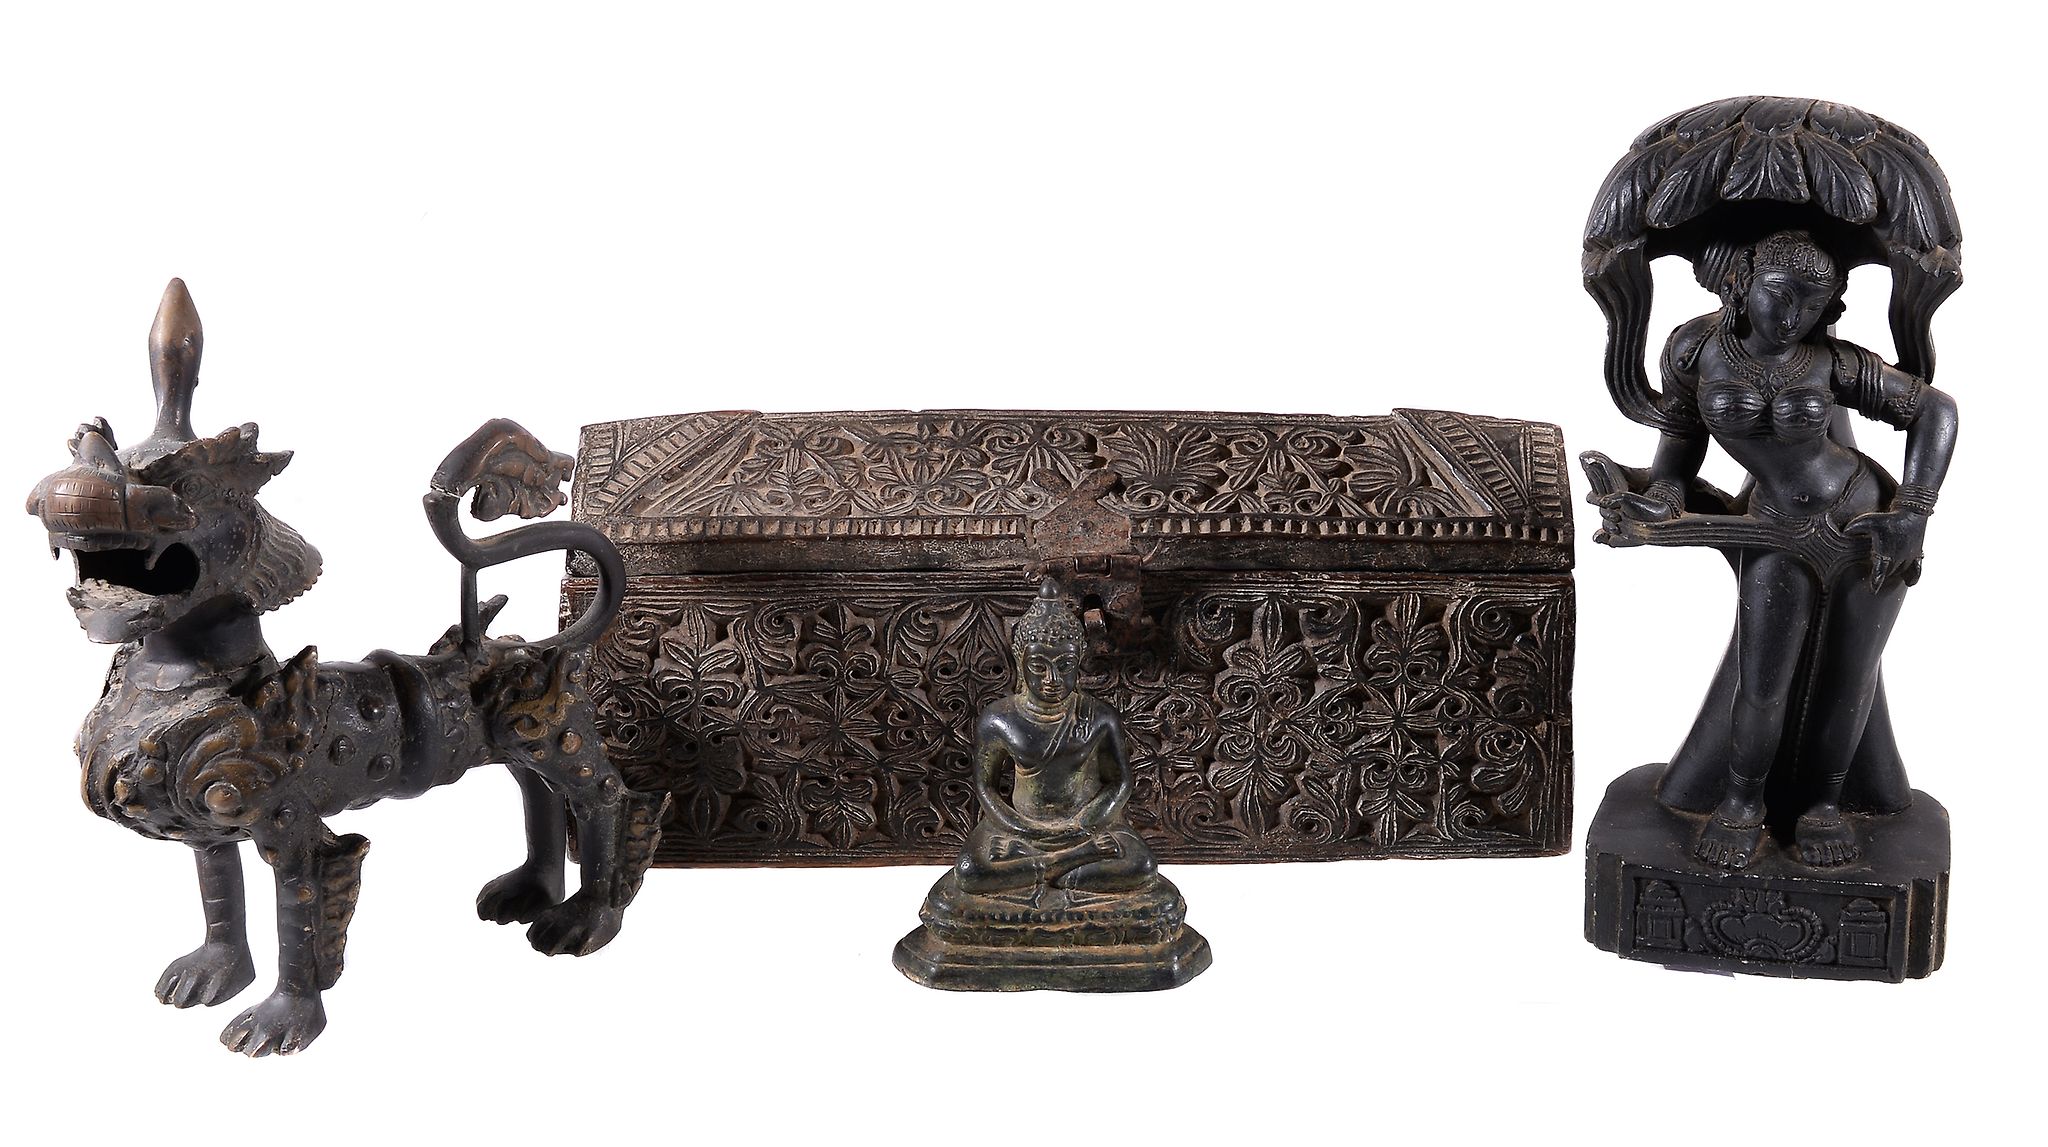 A Chinese bronze Buddha, seated dhyanasana with his hands joined in dhyana mudra, 14cm high; a